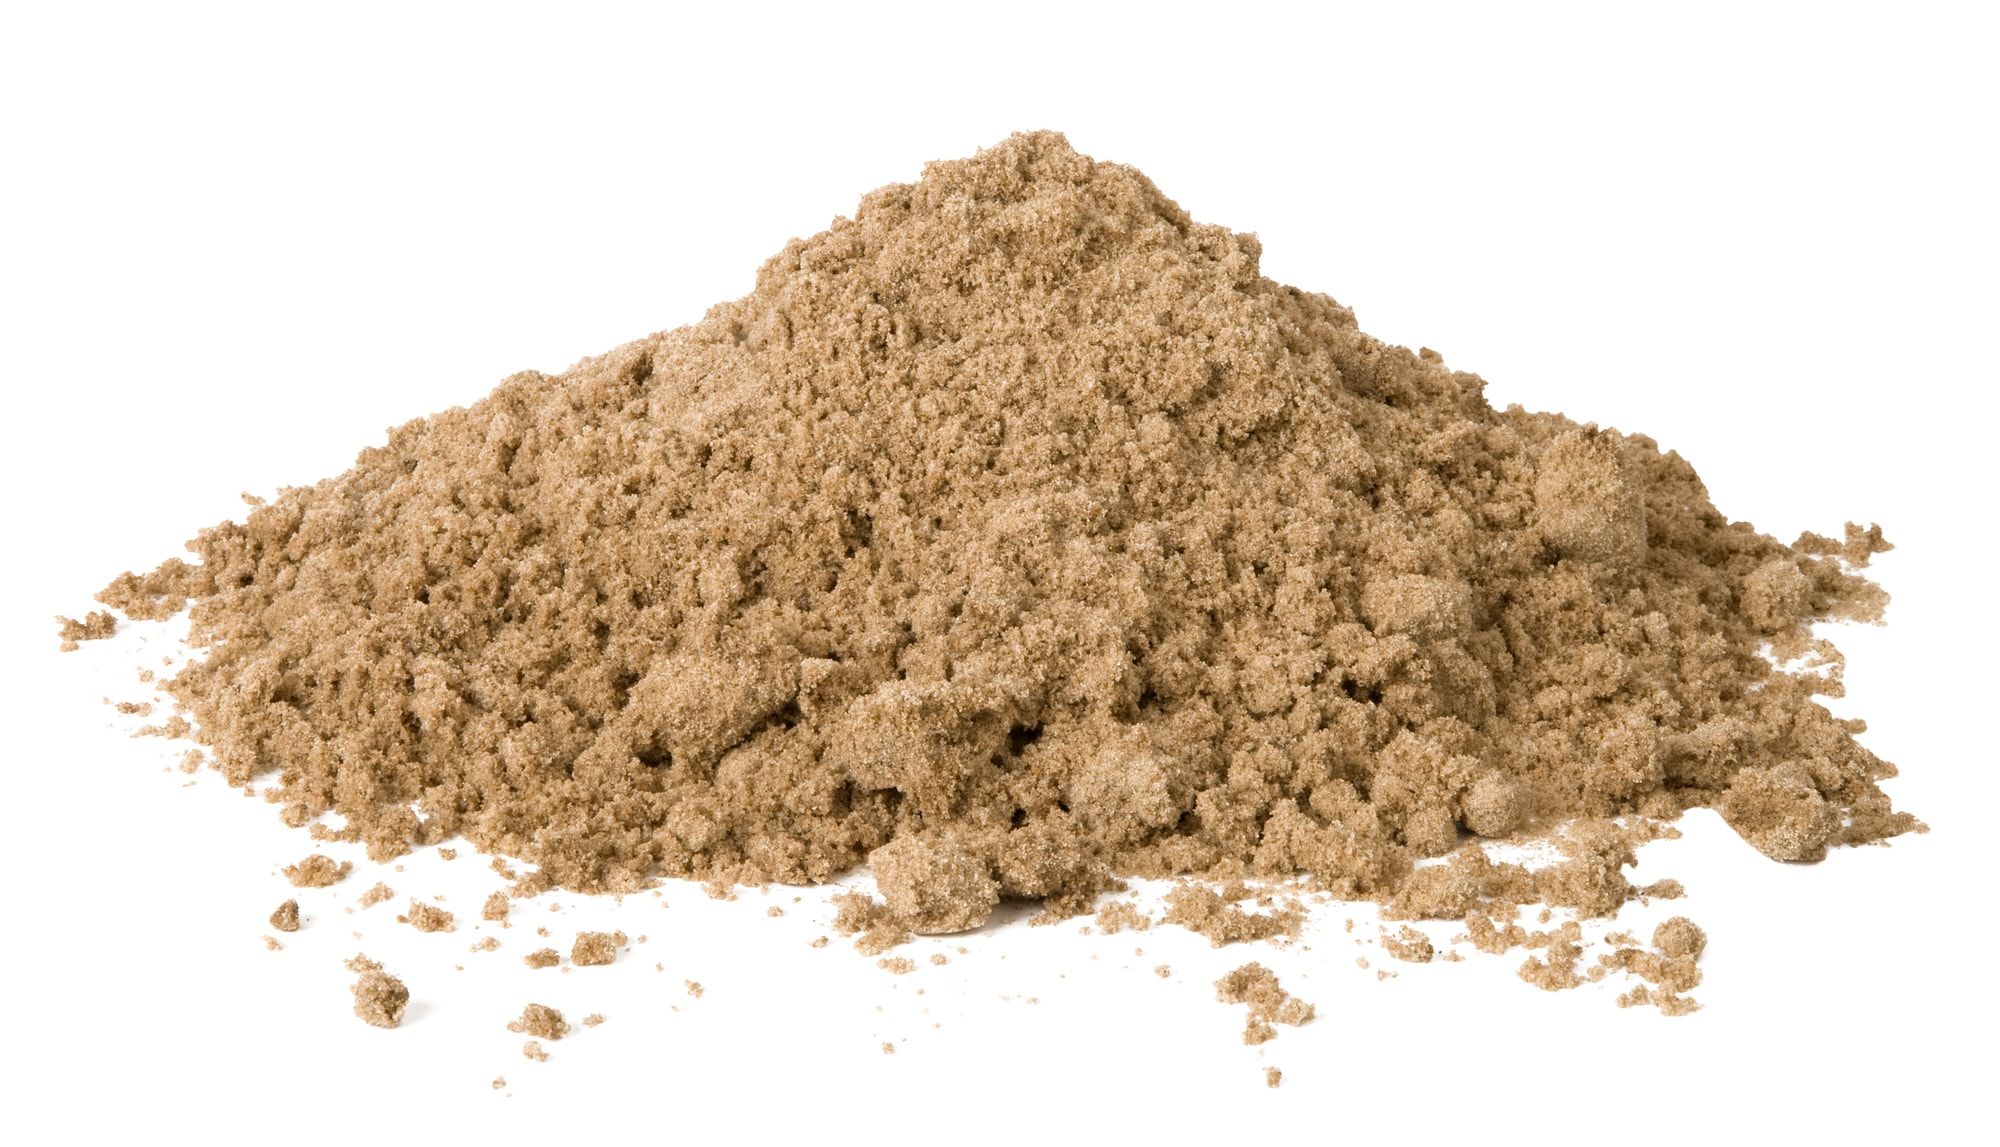 Pile of Sand isolated in white background